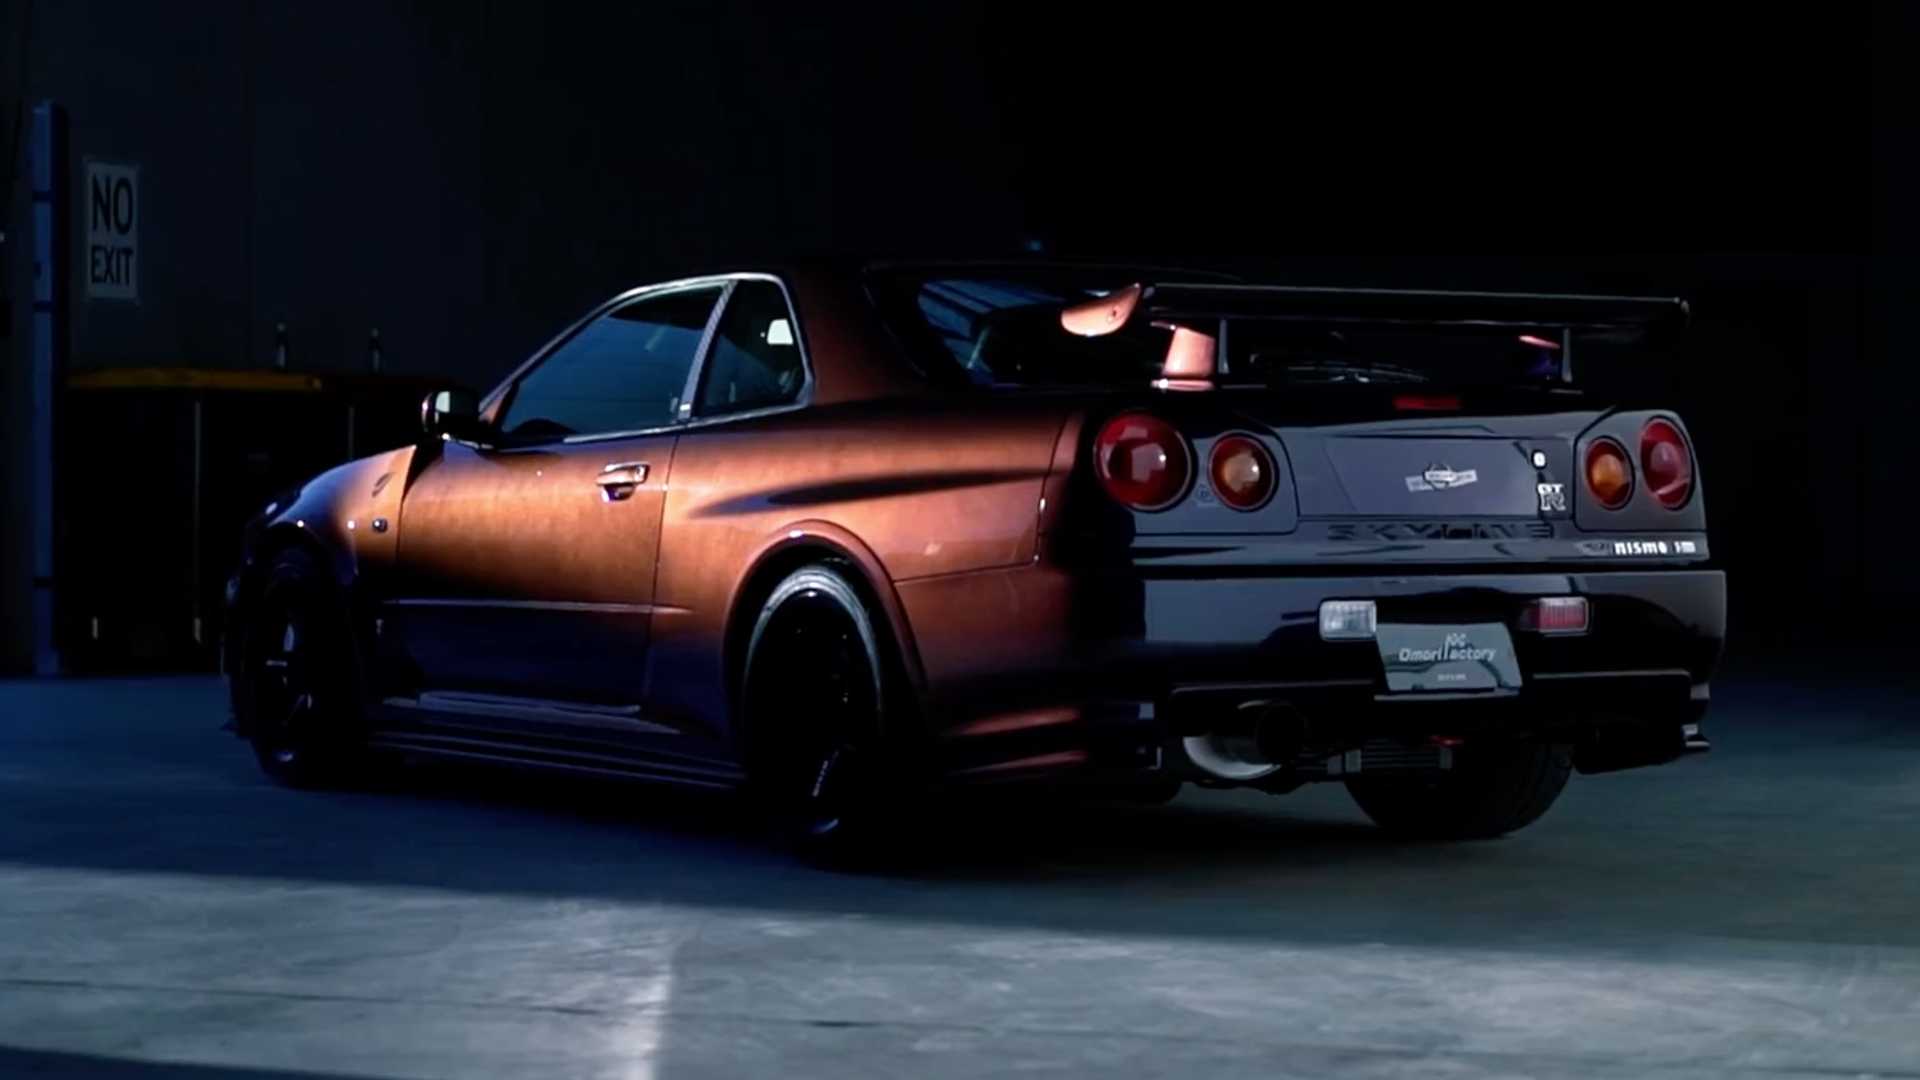 Detailing 'world's Most Expensive' Nissan GT R R34 Is Relaxing To See